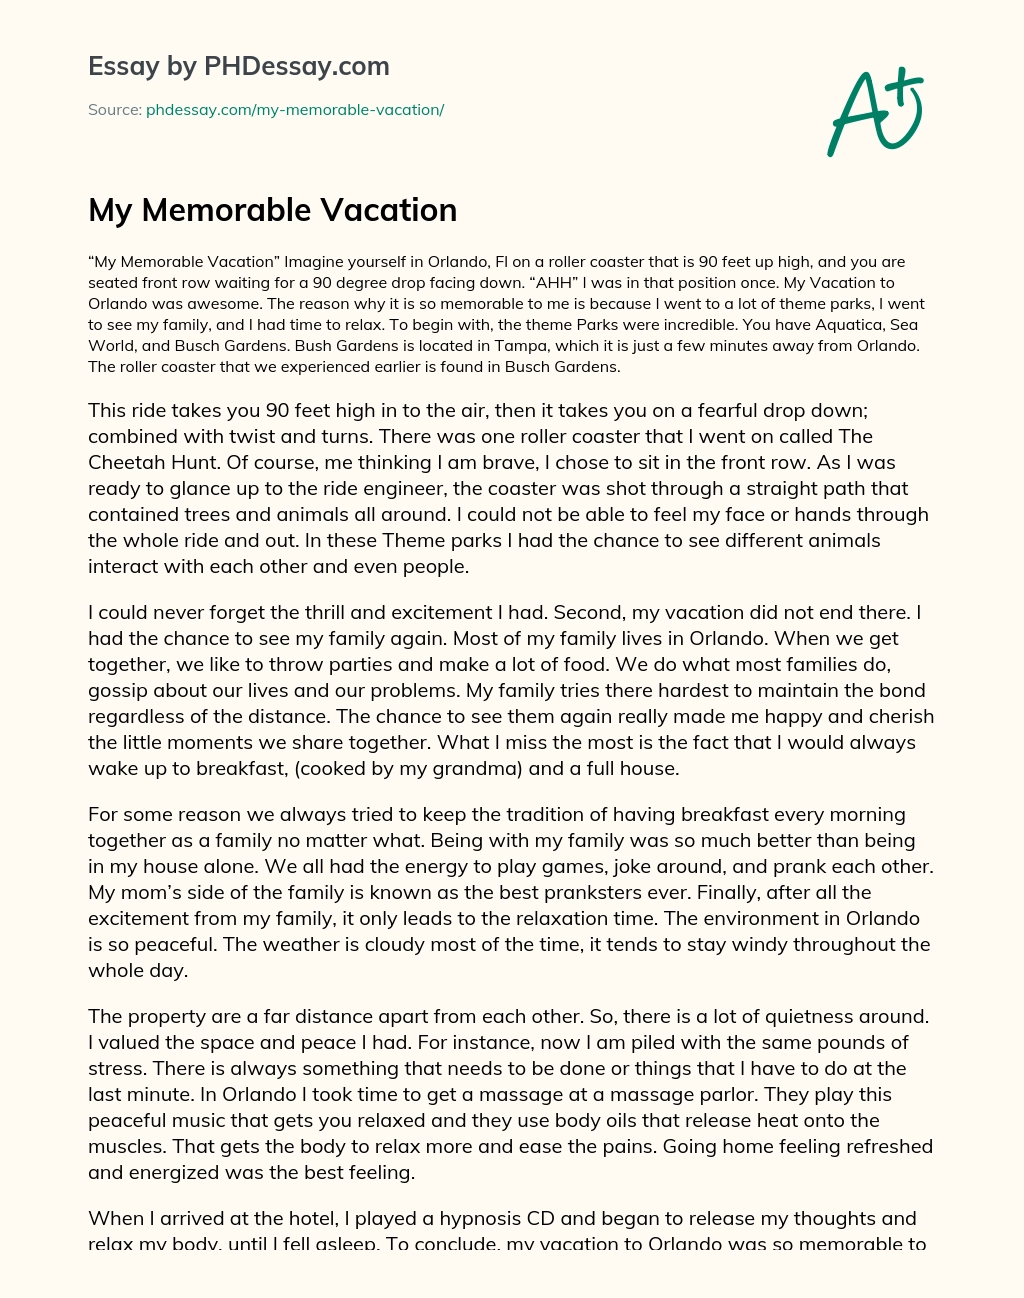 the most memorable vacation essay